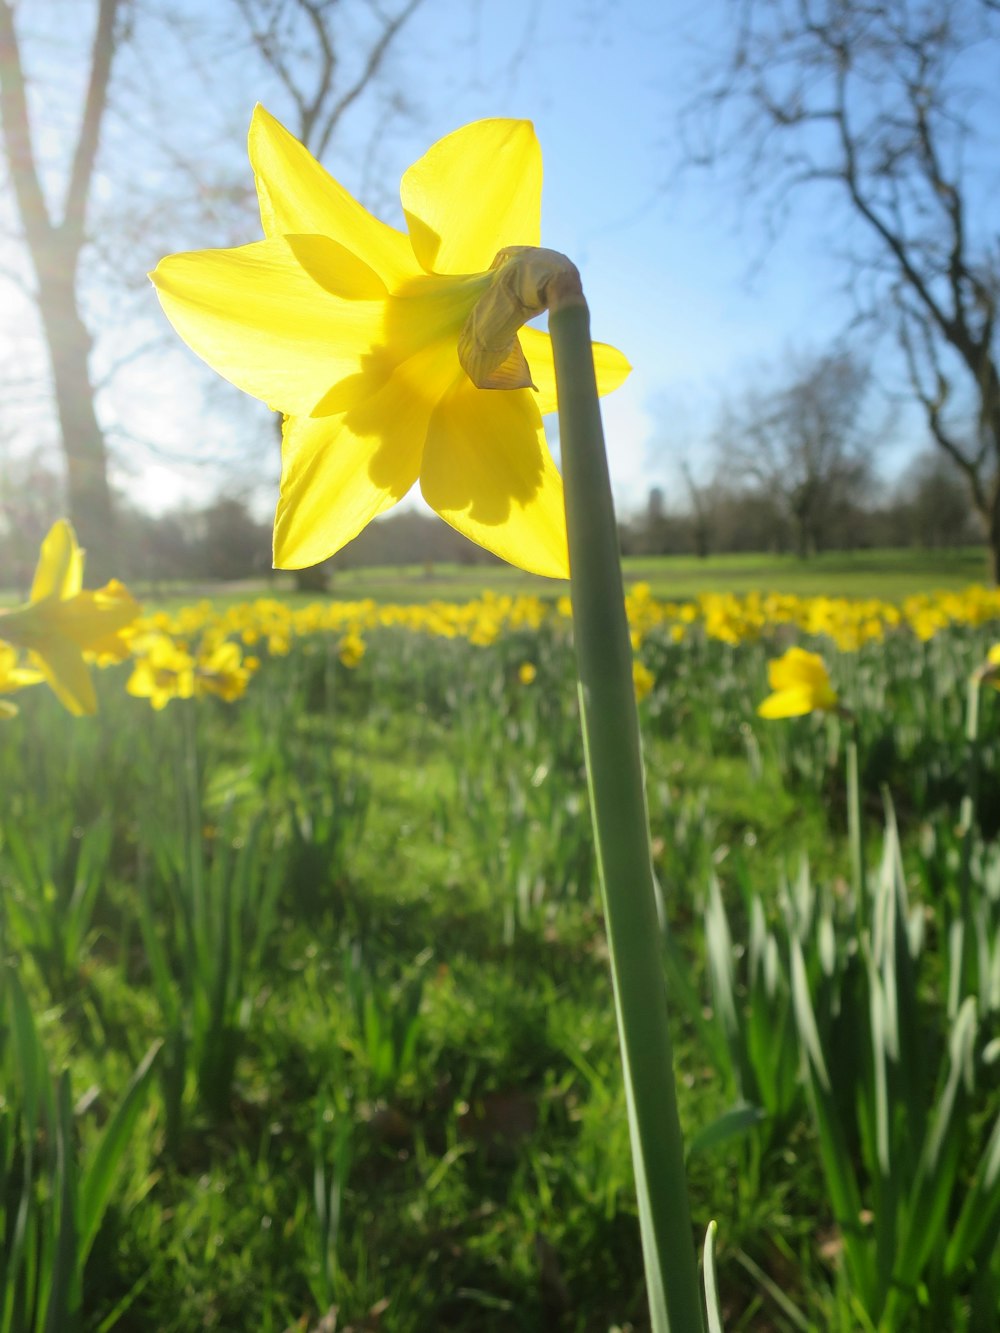 a single yellow daffodil in a field of green grass